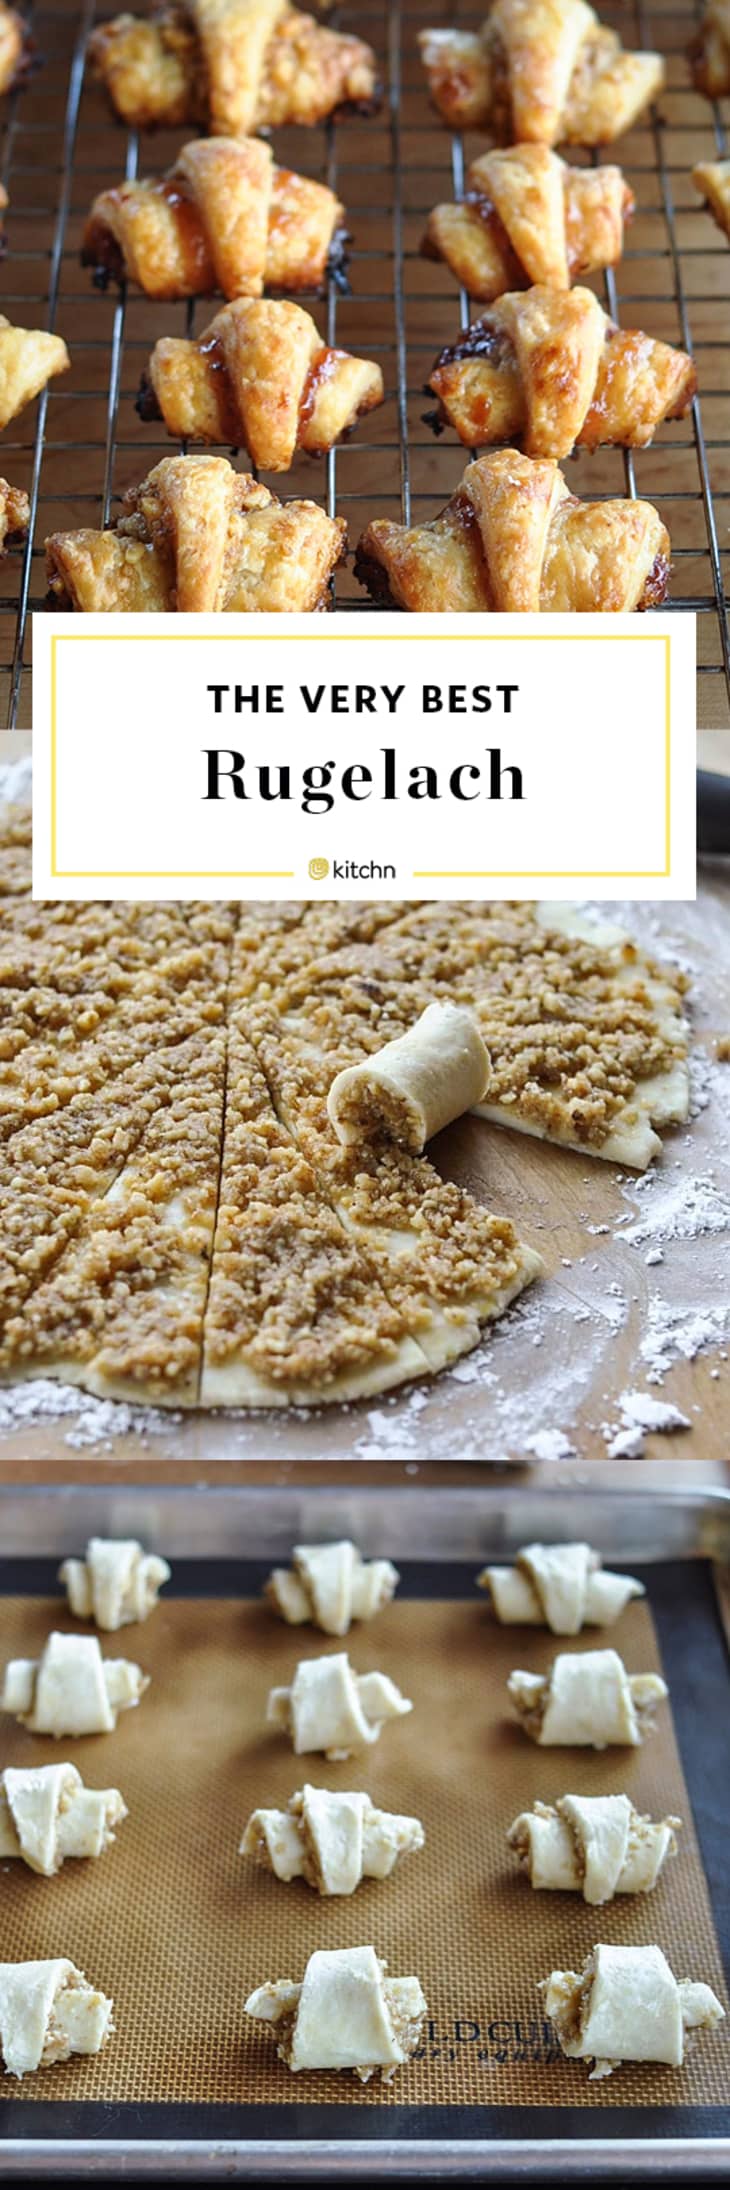 Rugelach Recipe How To Make Rugelach Cookies Kitchn